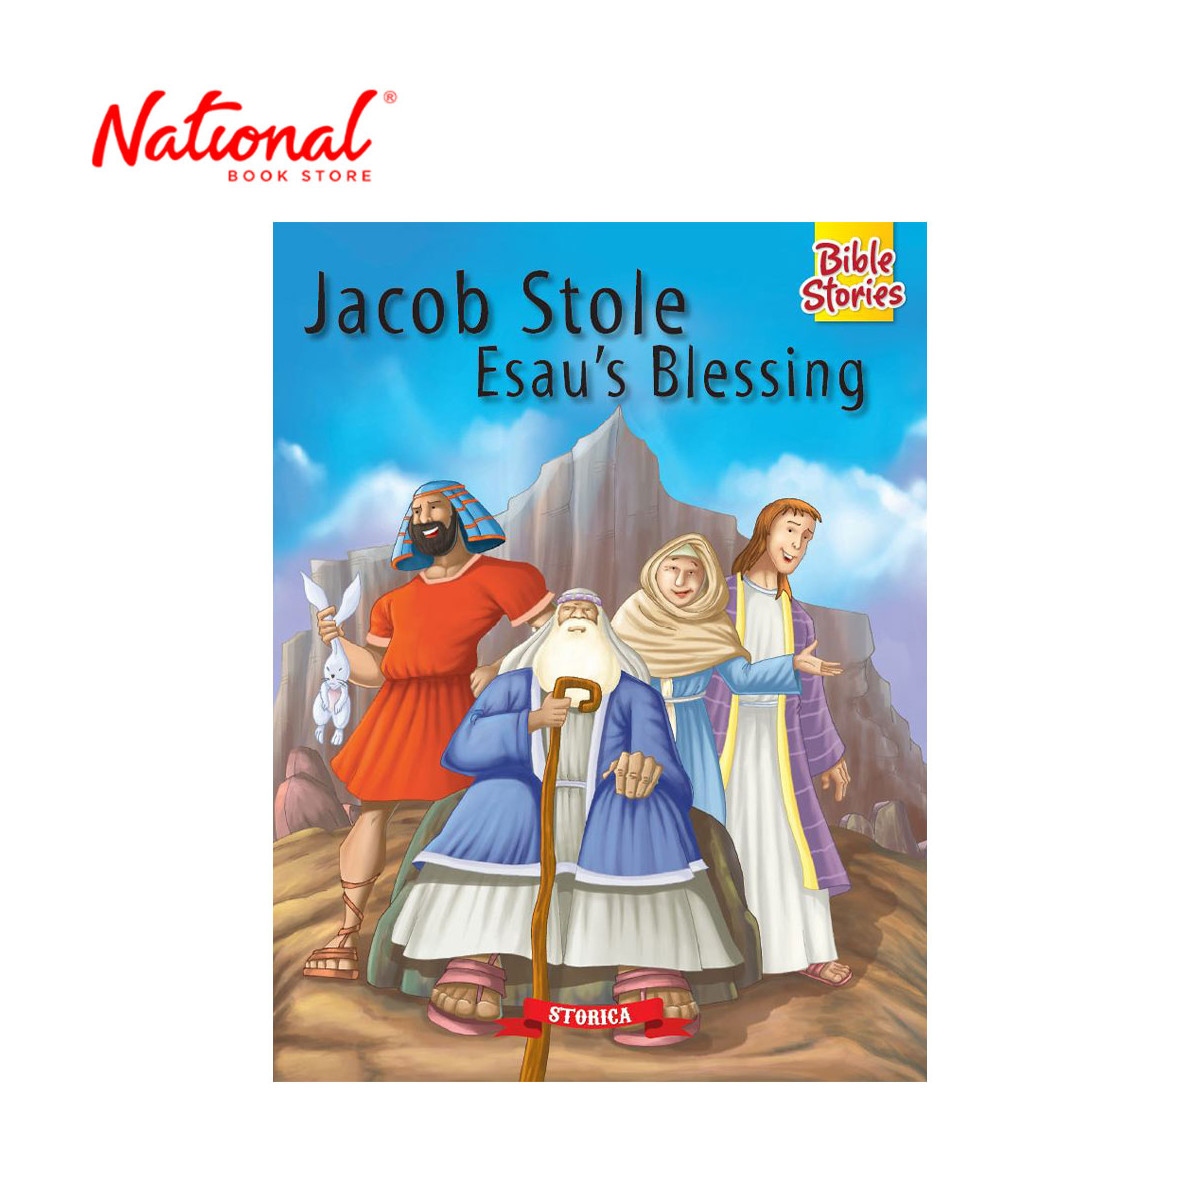 Jacob Stole Esau's Blessing - Trade Paperback - Bible Stories for Kids